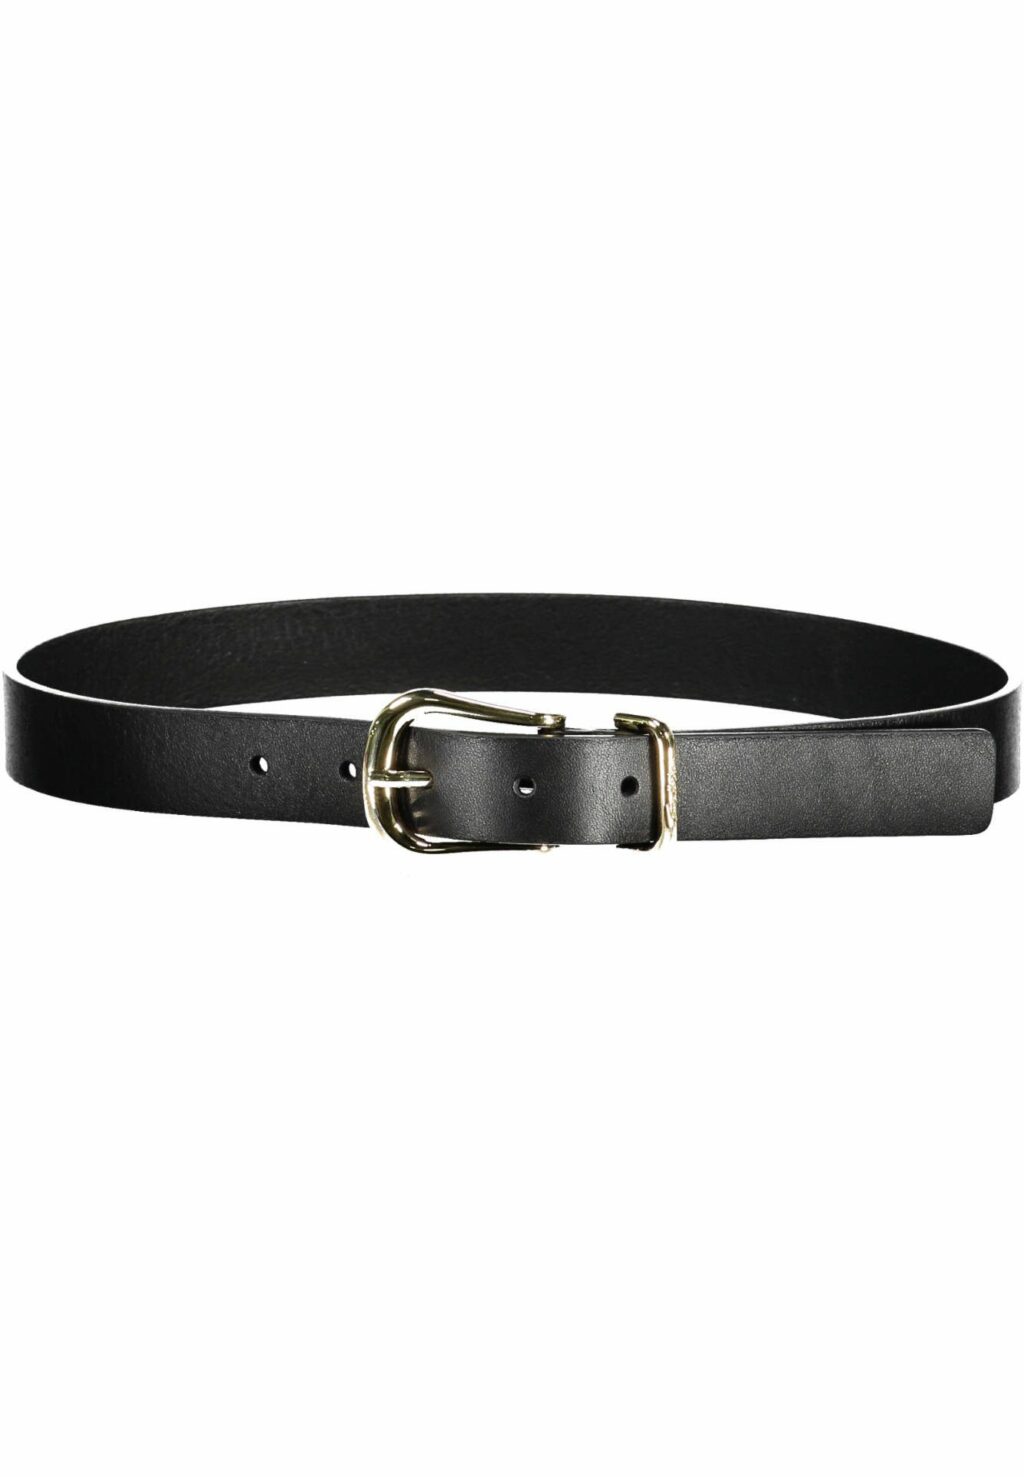 TOMMY HILFIGER BLACK WOMEN'S LEATHER BELT AW0AW12147_NERO_BDS